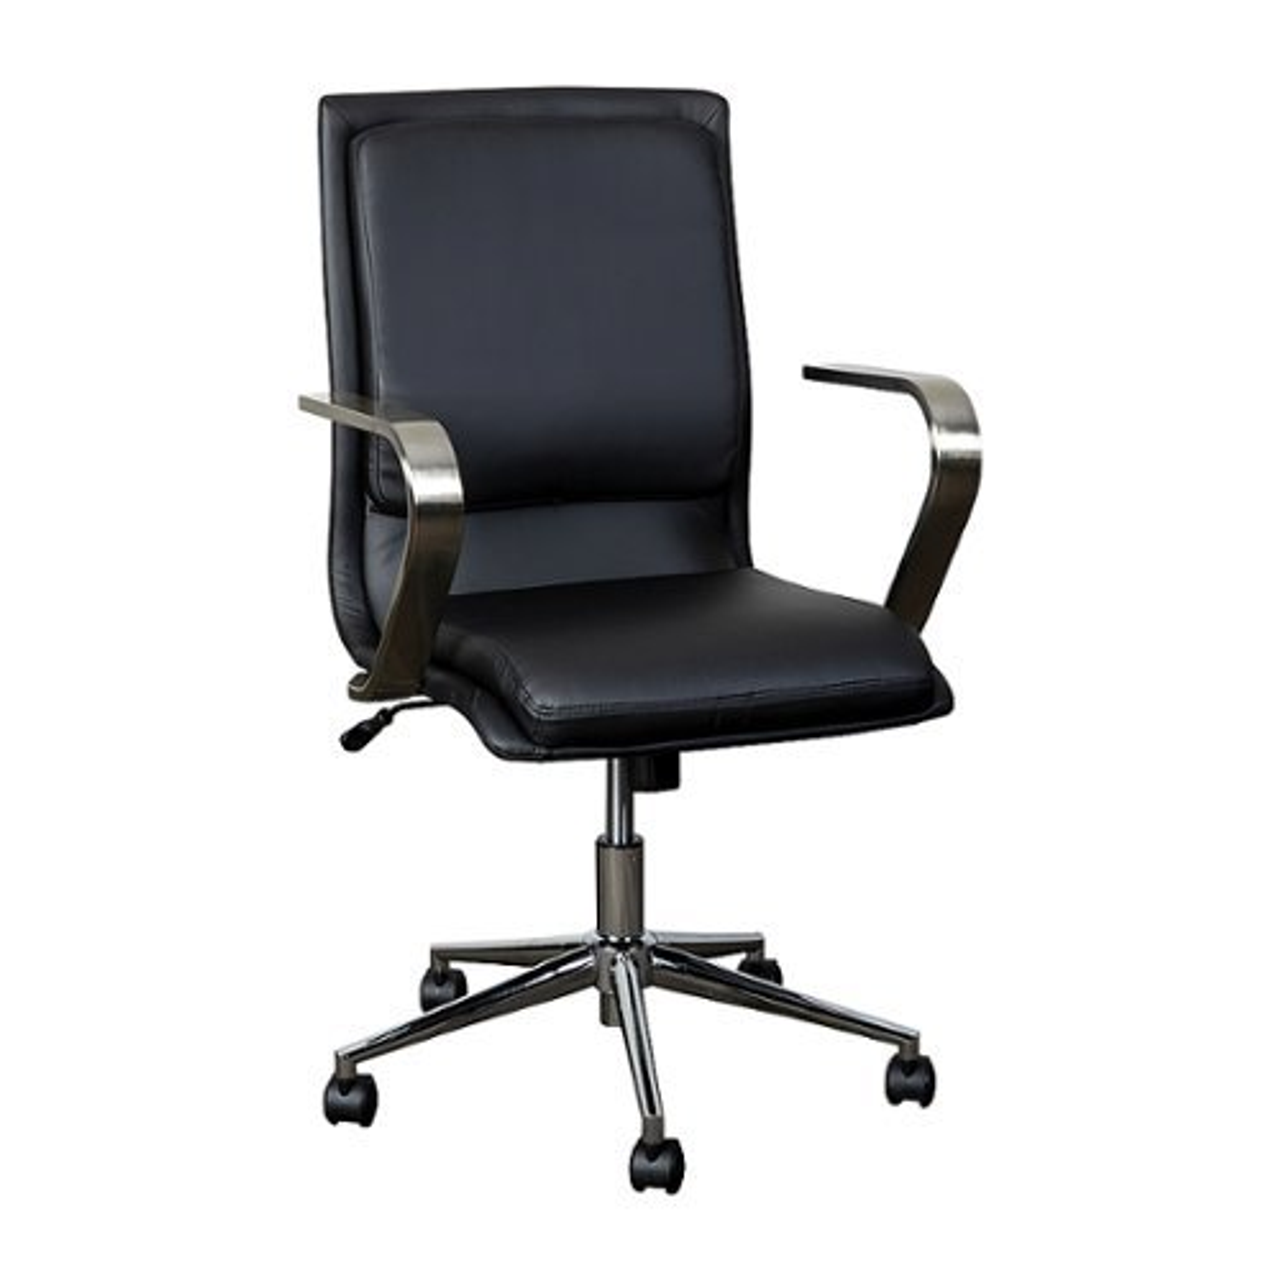 Flash Furniture - James Designer Executive Swivel Office Chair with Brushed Chrome Arms and Base, Black - Black/Chrome